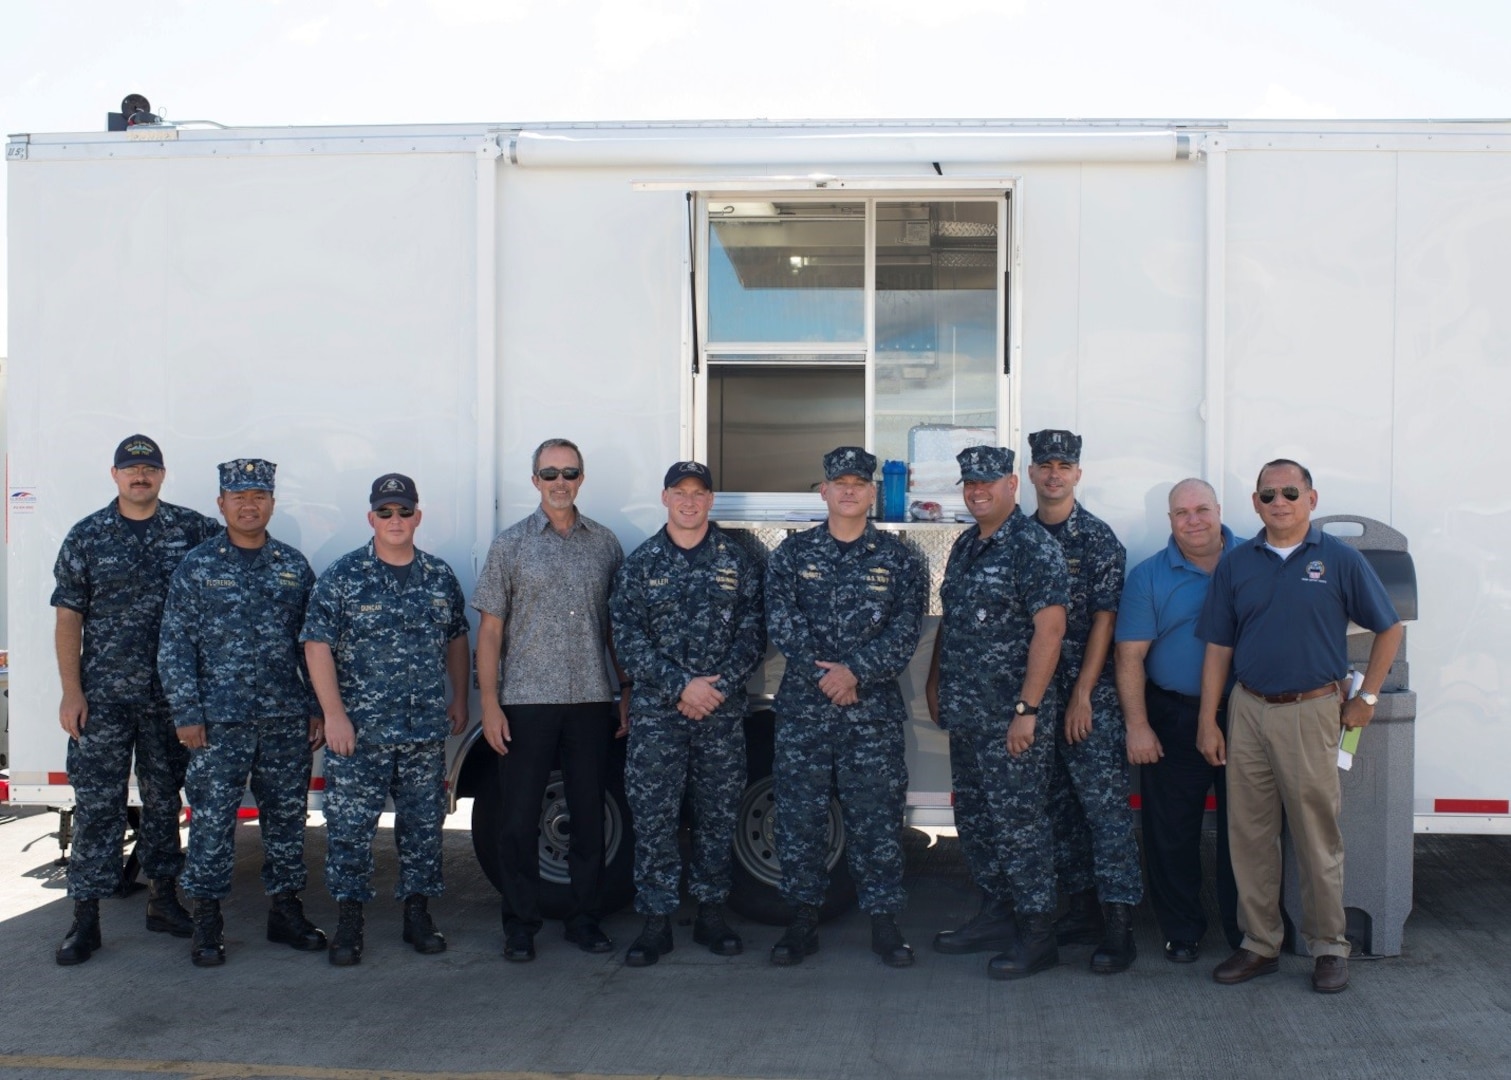 Personnel from DLA Troop Support Pacific, the Naval Submarine Support Command and the USS Columbus submarine are pictured in front of a new mobile galley at Joint Base Pearl Harbor-Hickam Oct. 25, 2016. The galley was purchase through DLA Troop Support’s Subsistence supply chain and is used for temporary food service while submarines are undergoing maintenance.